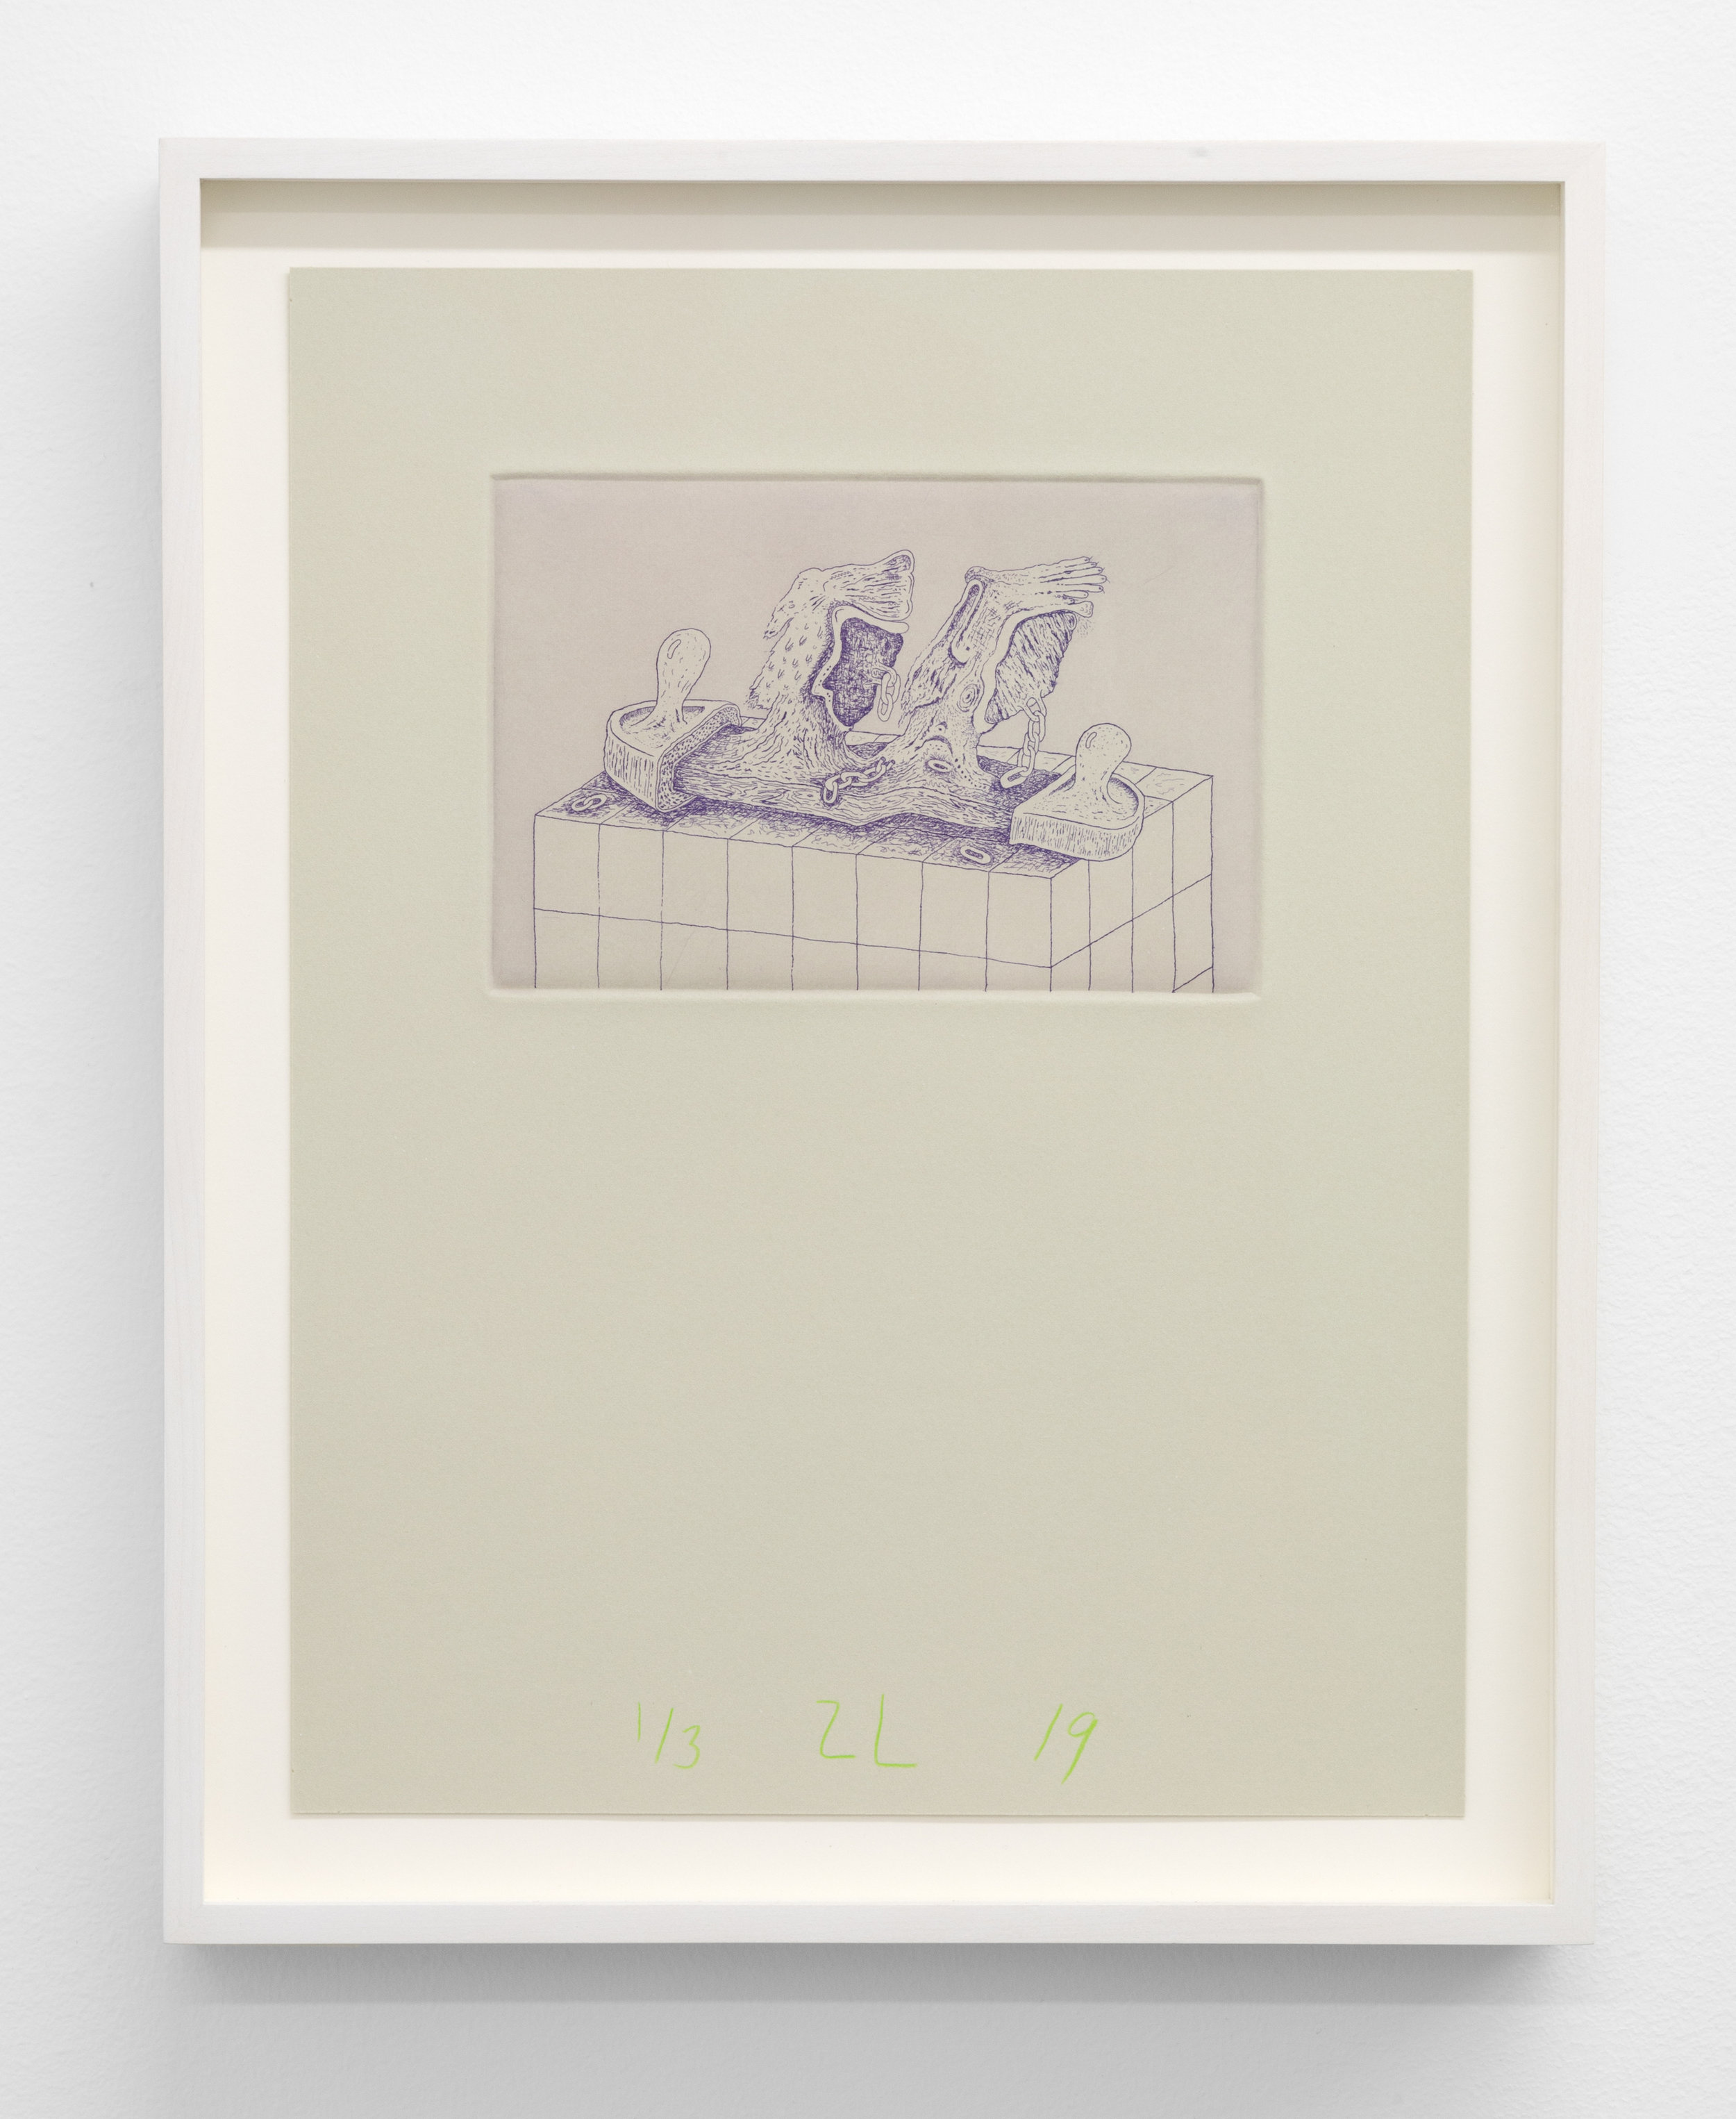  Zachary Leener,  Shekinta (Finger) , 2019 Edition of 3 + 1 AP, Etching and aquatint, ink on paper 6 x 4 in 